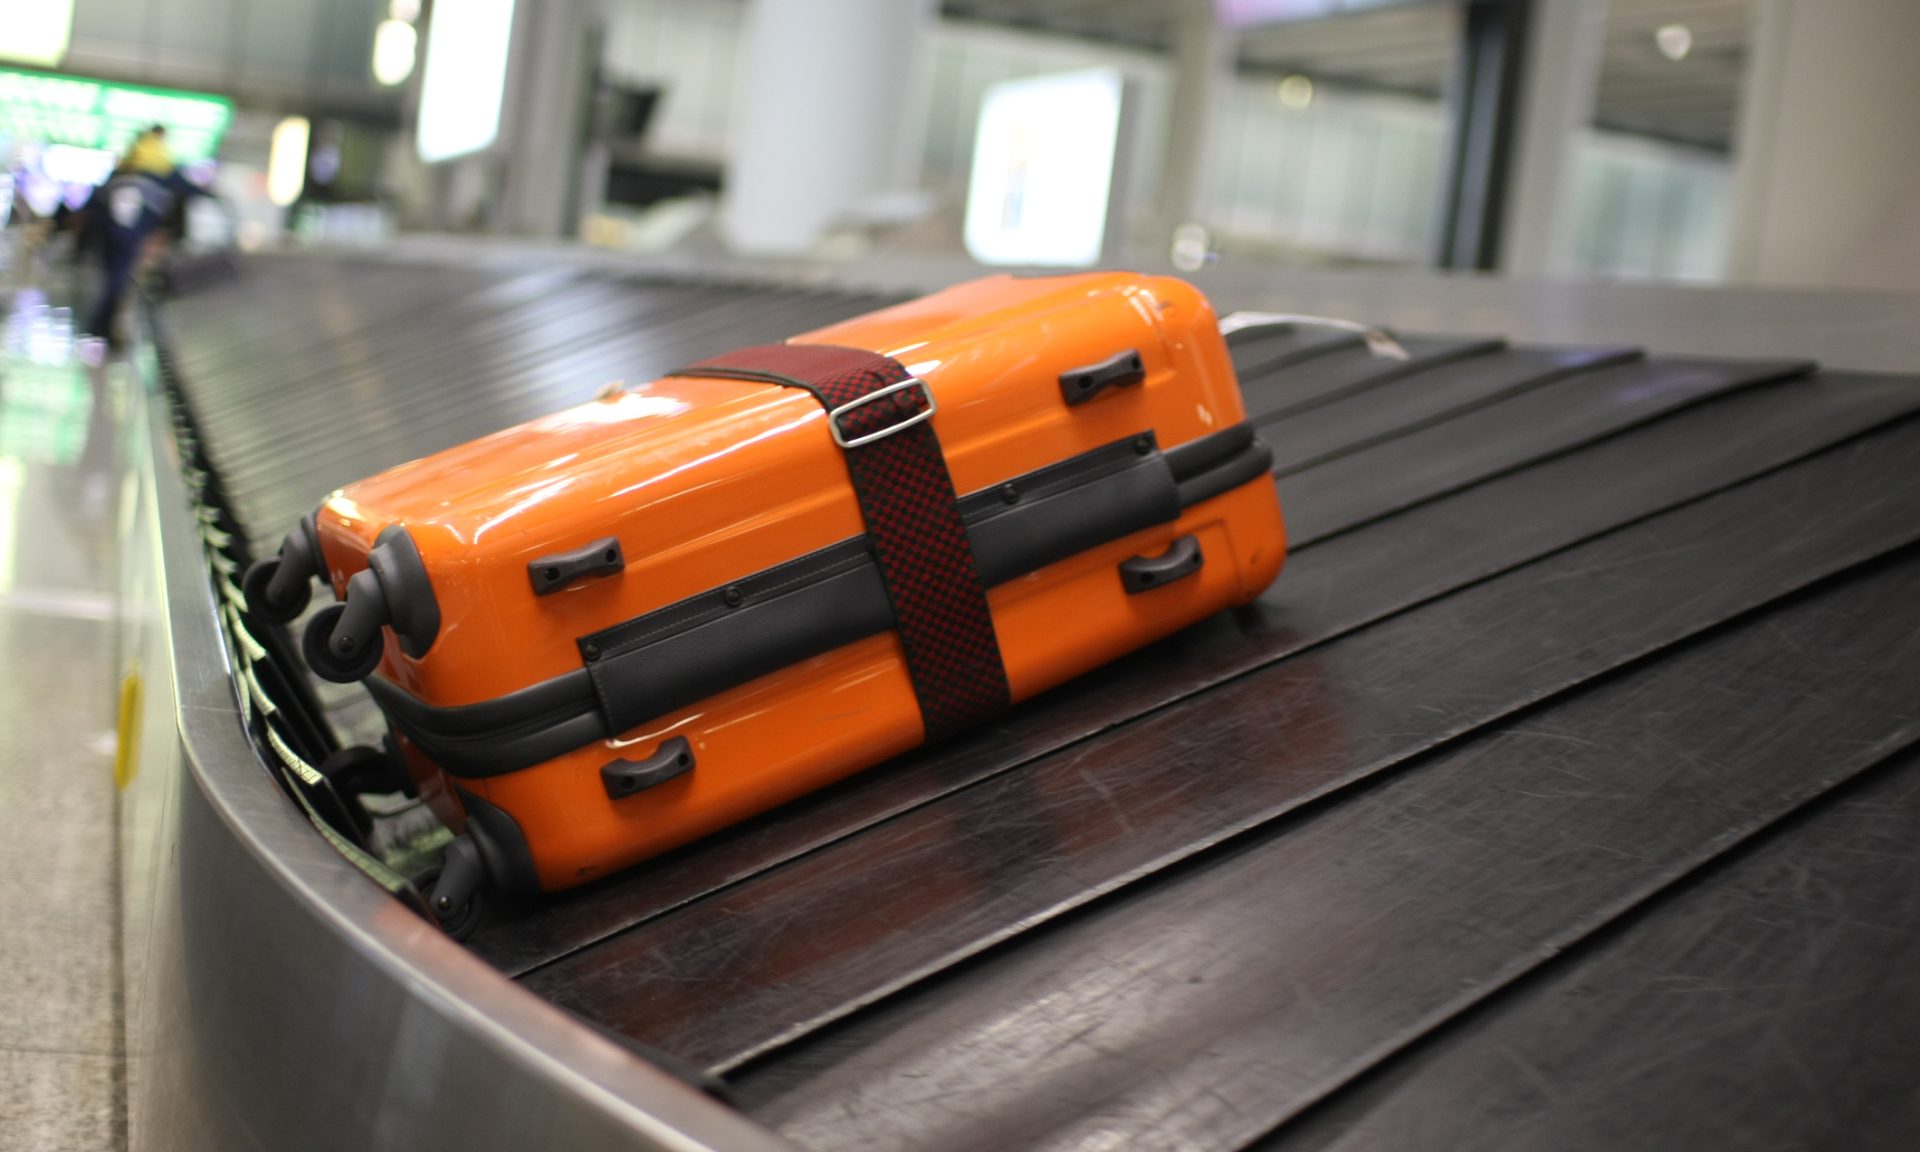 The 15 Best Luggage Brands For Every Type Of Travel 2023 - Forbes